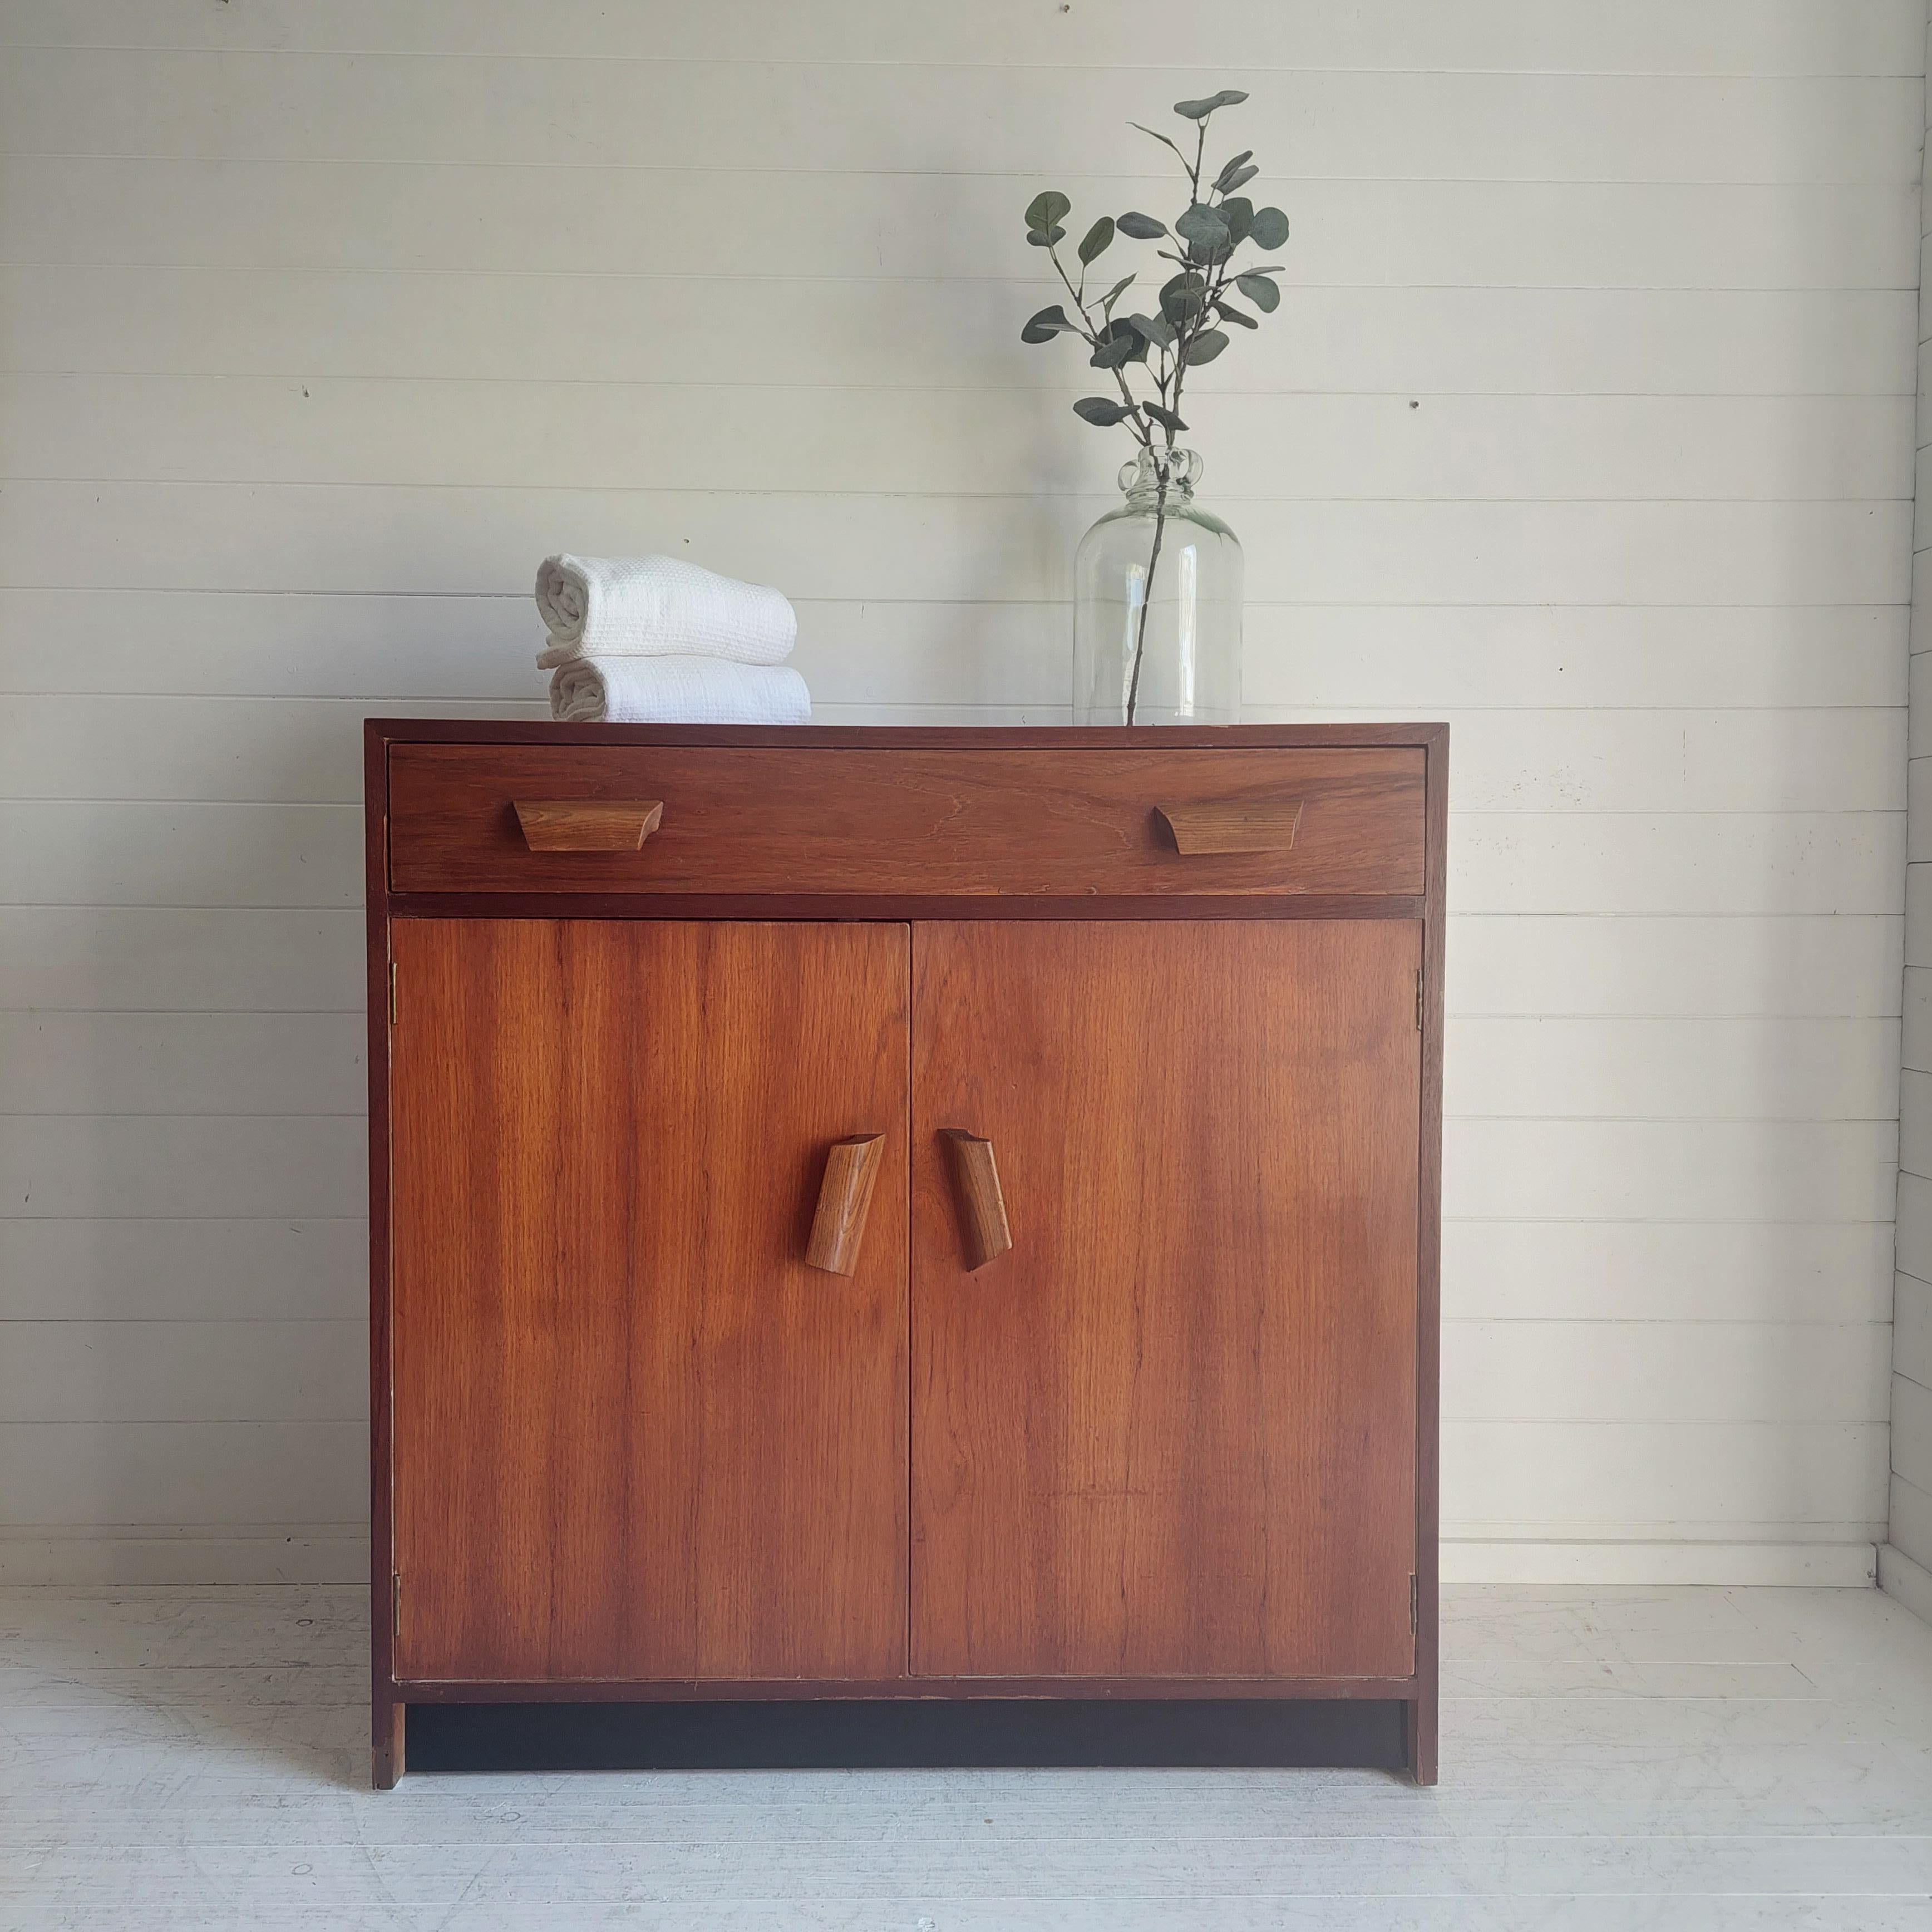 A Late Art Deco early Mid Century cupboard 50s

A beautifully simplistic, rustic look teak shelved storage cupboard with drawer.
In contrasting rich teak with  huge carved oak handles with a two door cupboard hosting a shelf above a single drawer